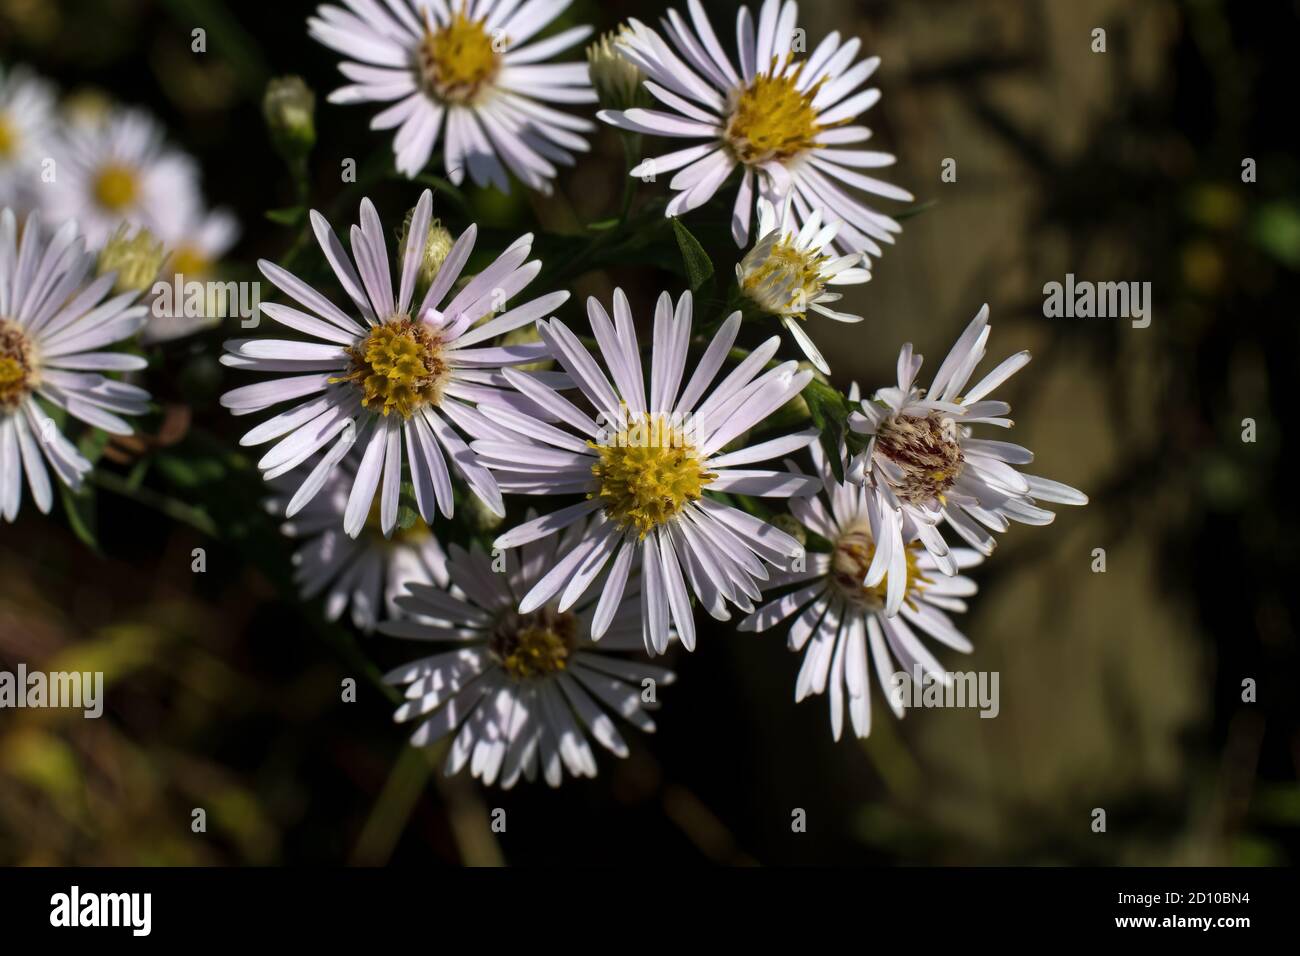 Panicled aster or tall white aster on an autumn day. It is a species of flowering plant in the family Asteraceae. It is native to North America Stock Photo